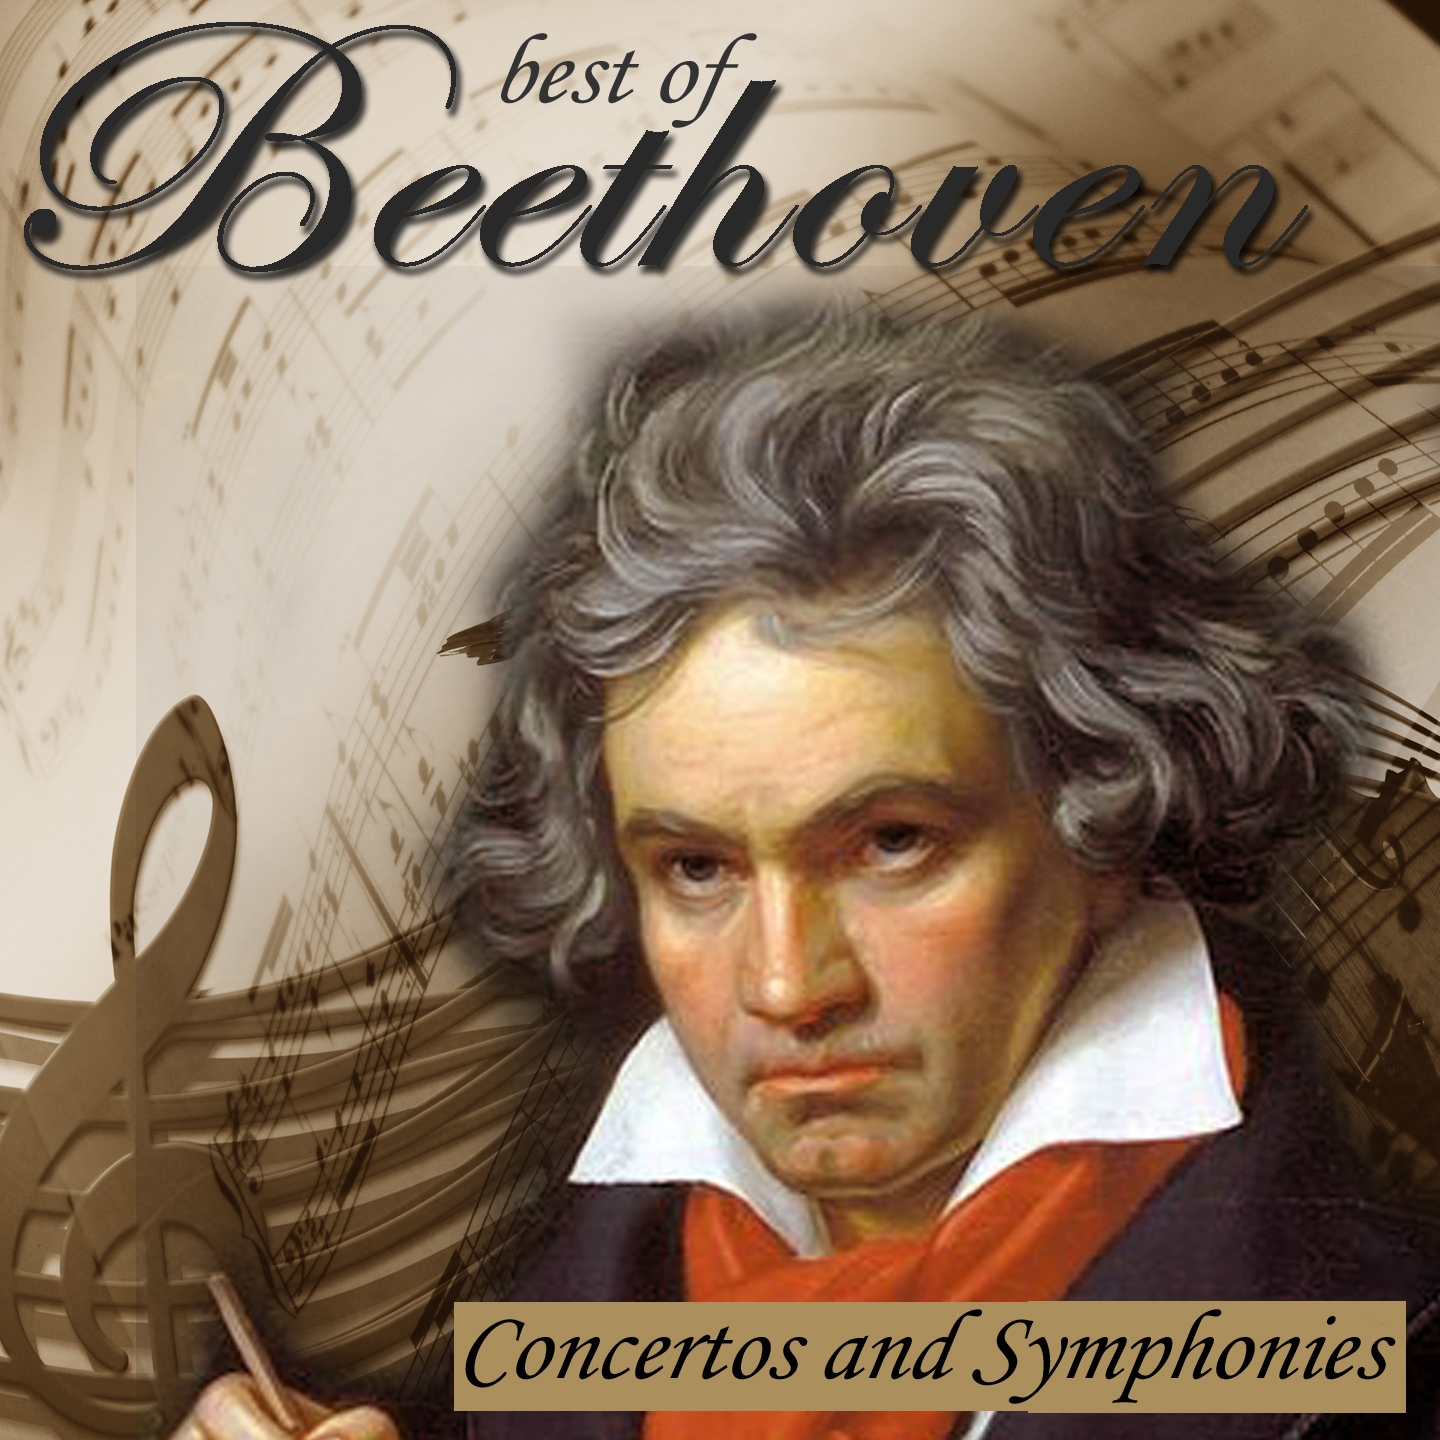 The Best of Beethoven: Concertos and Symphonies